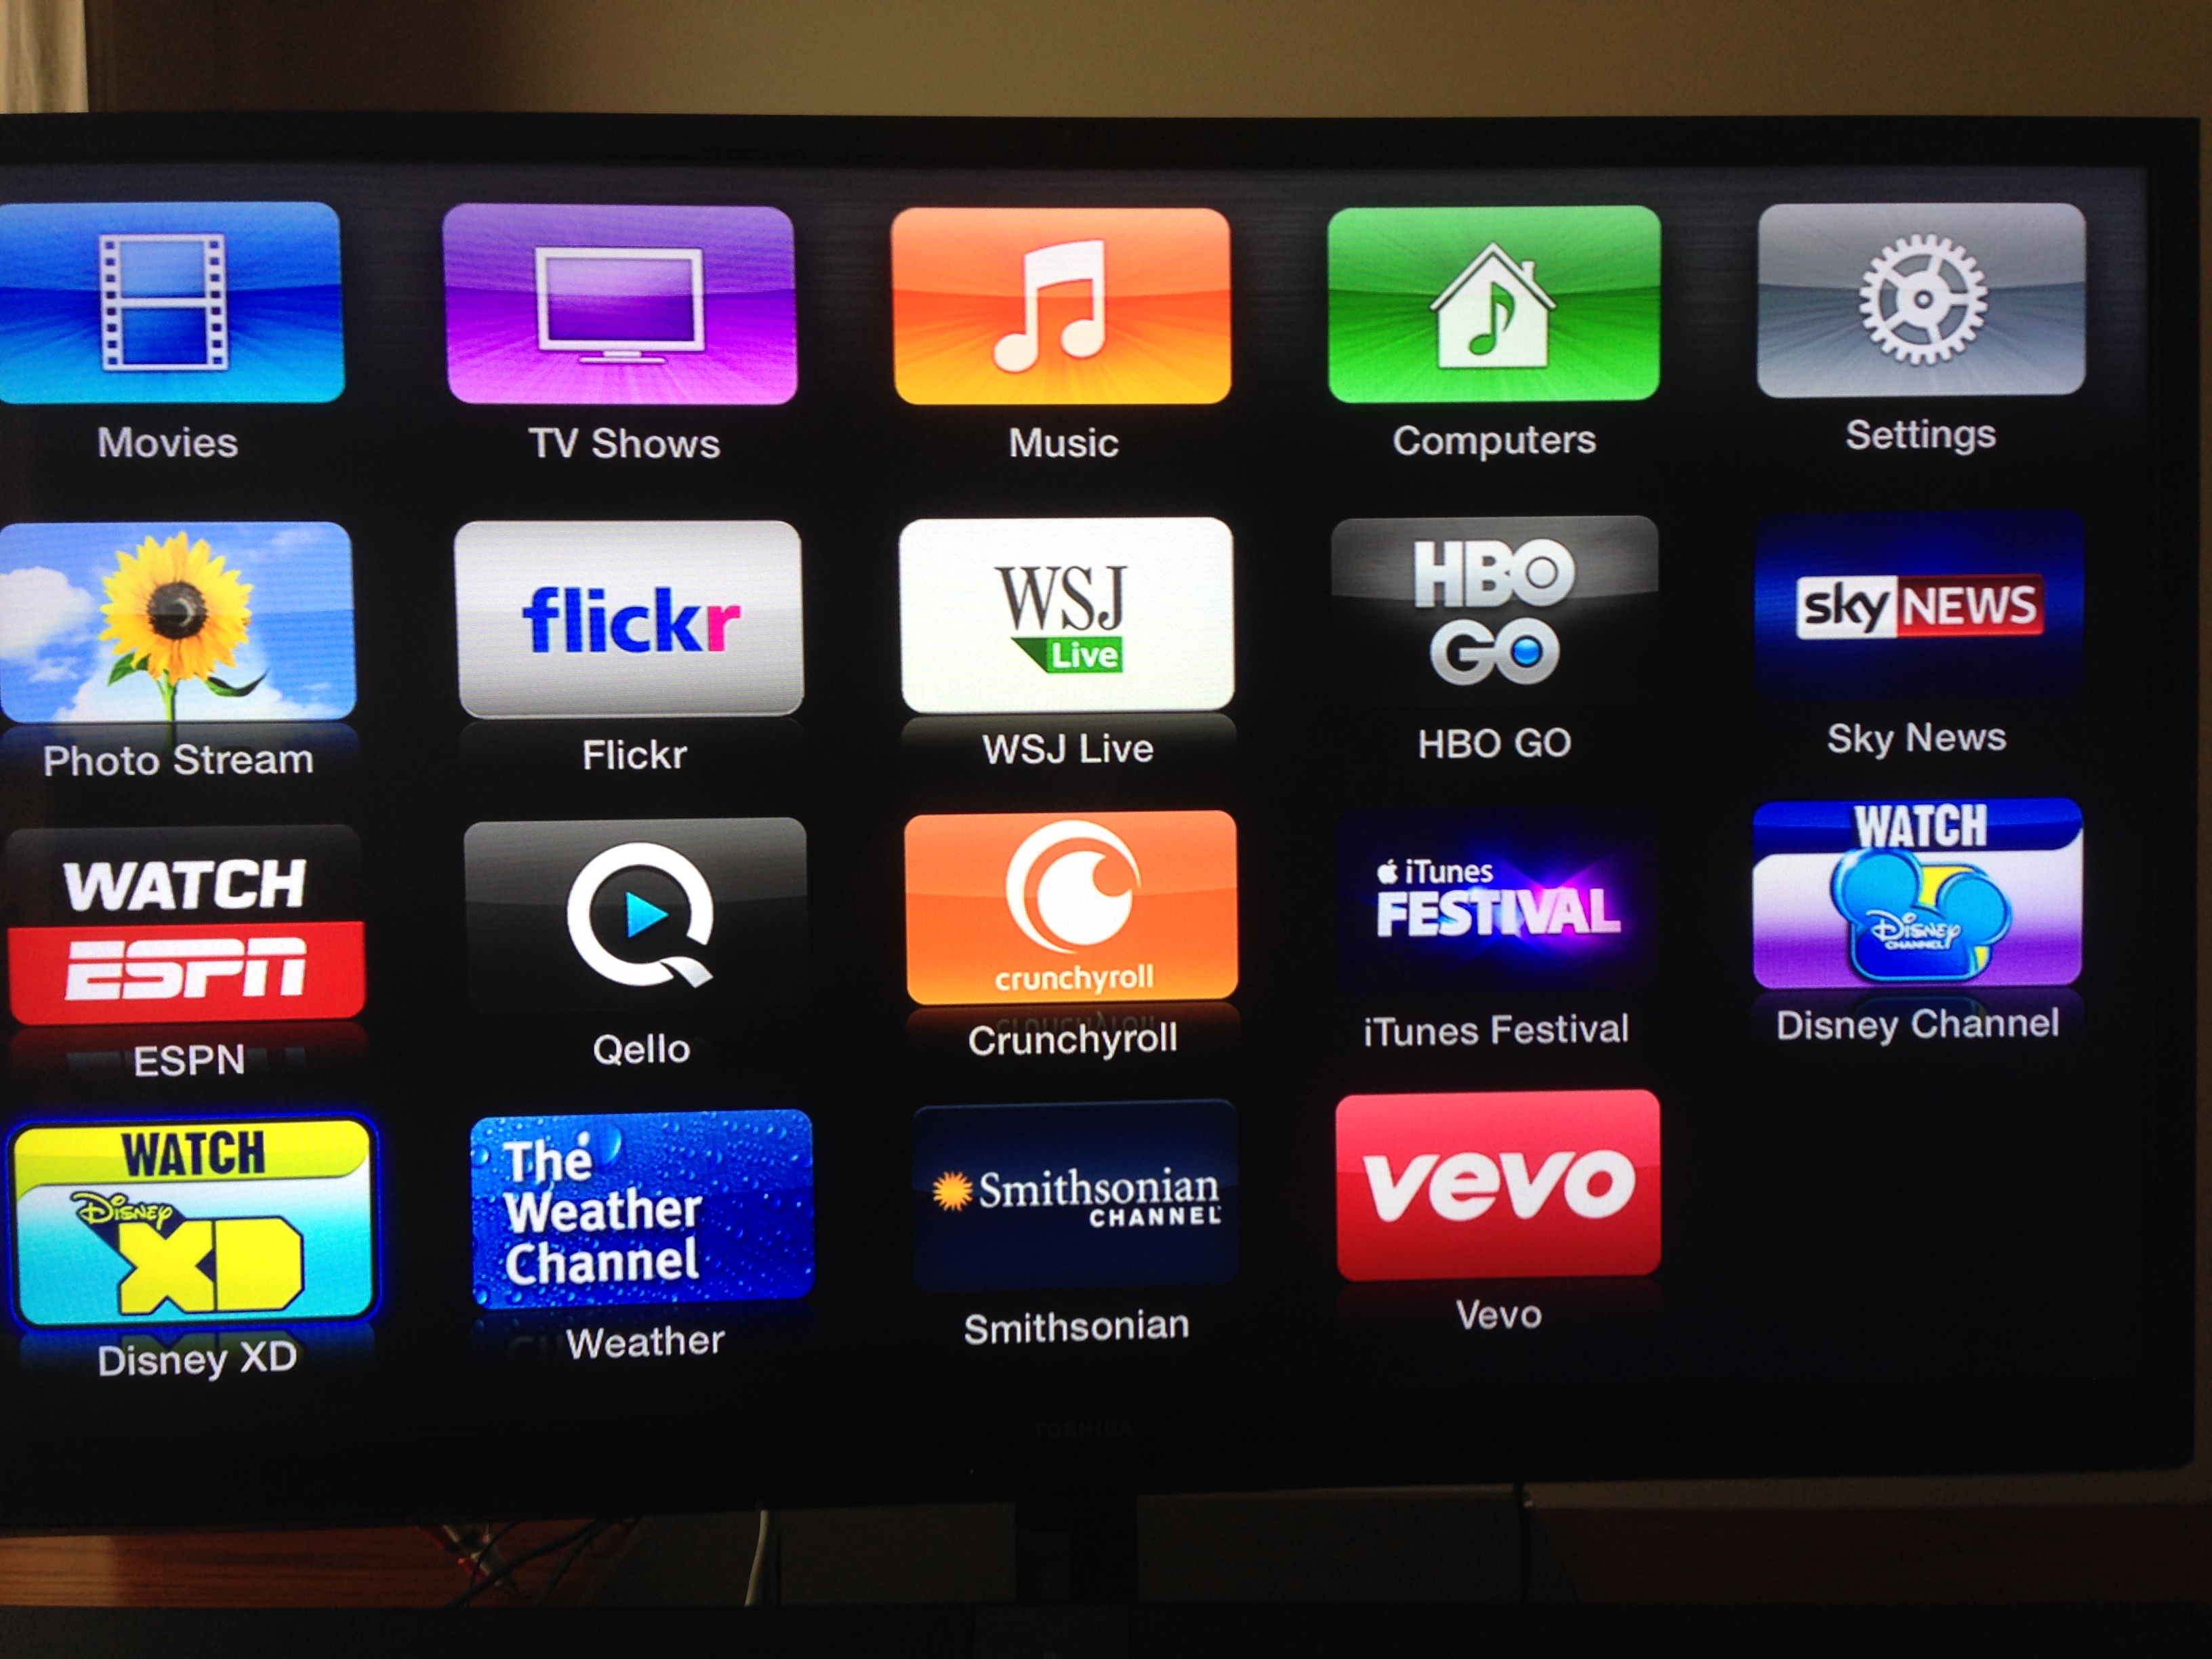 Apple TV Gains Vevo, Disney Channel HD, Disney XD, Weather Channel and